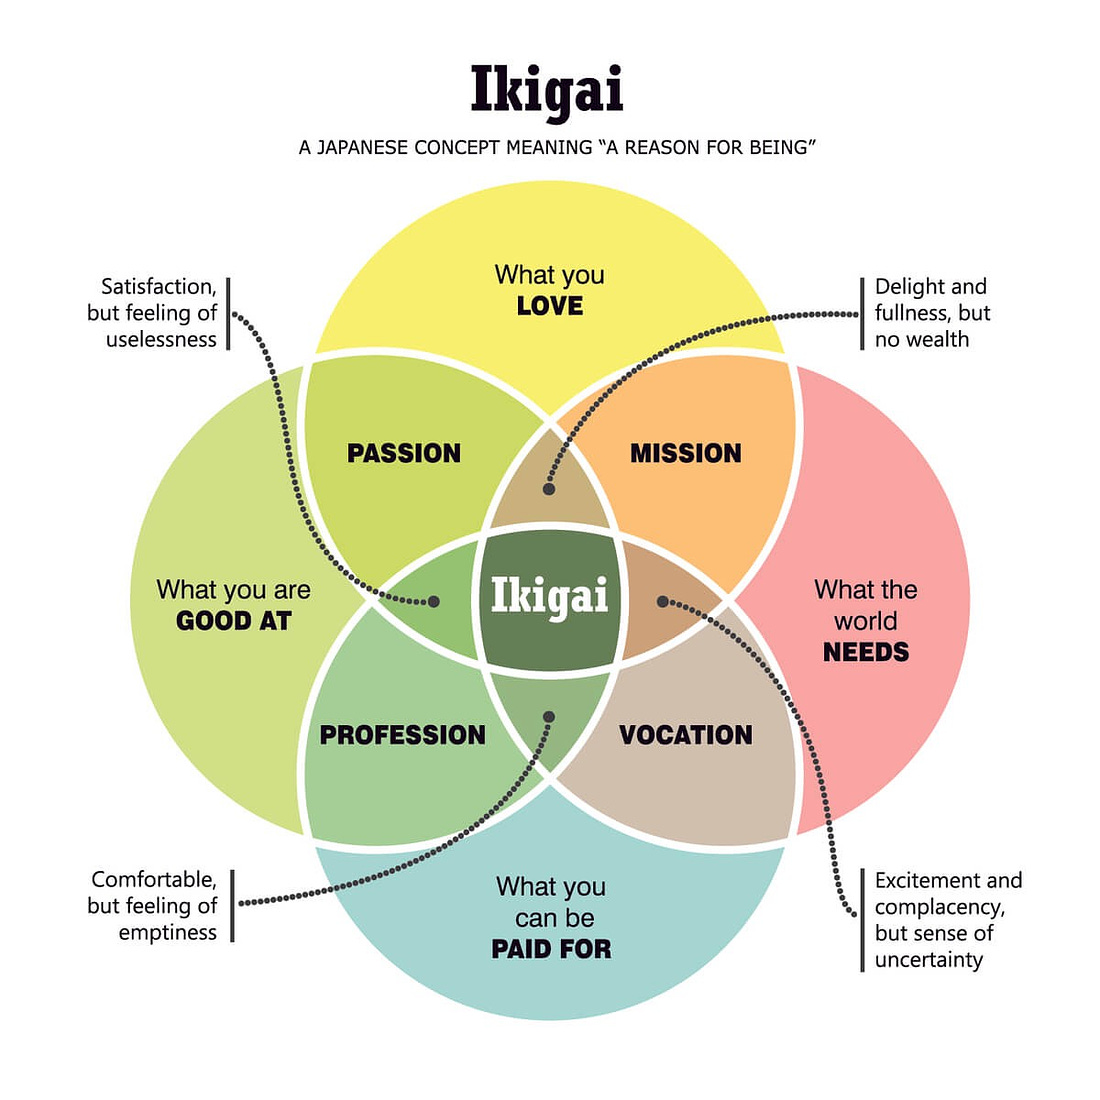 Demonstration of Ikigai with pie charts. Intersection of passion, profession, vocation and mission is “Ikigai”